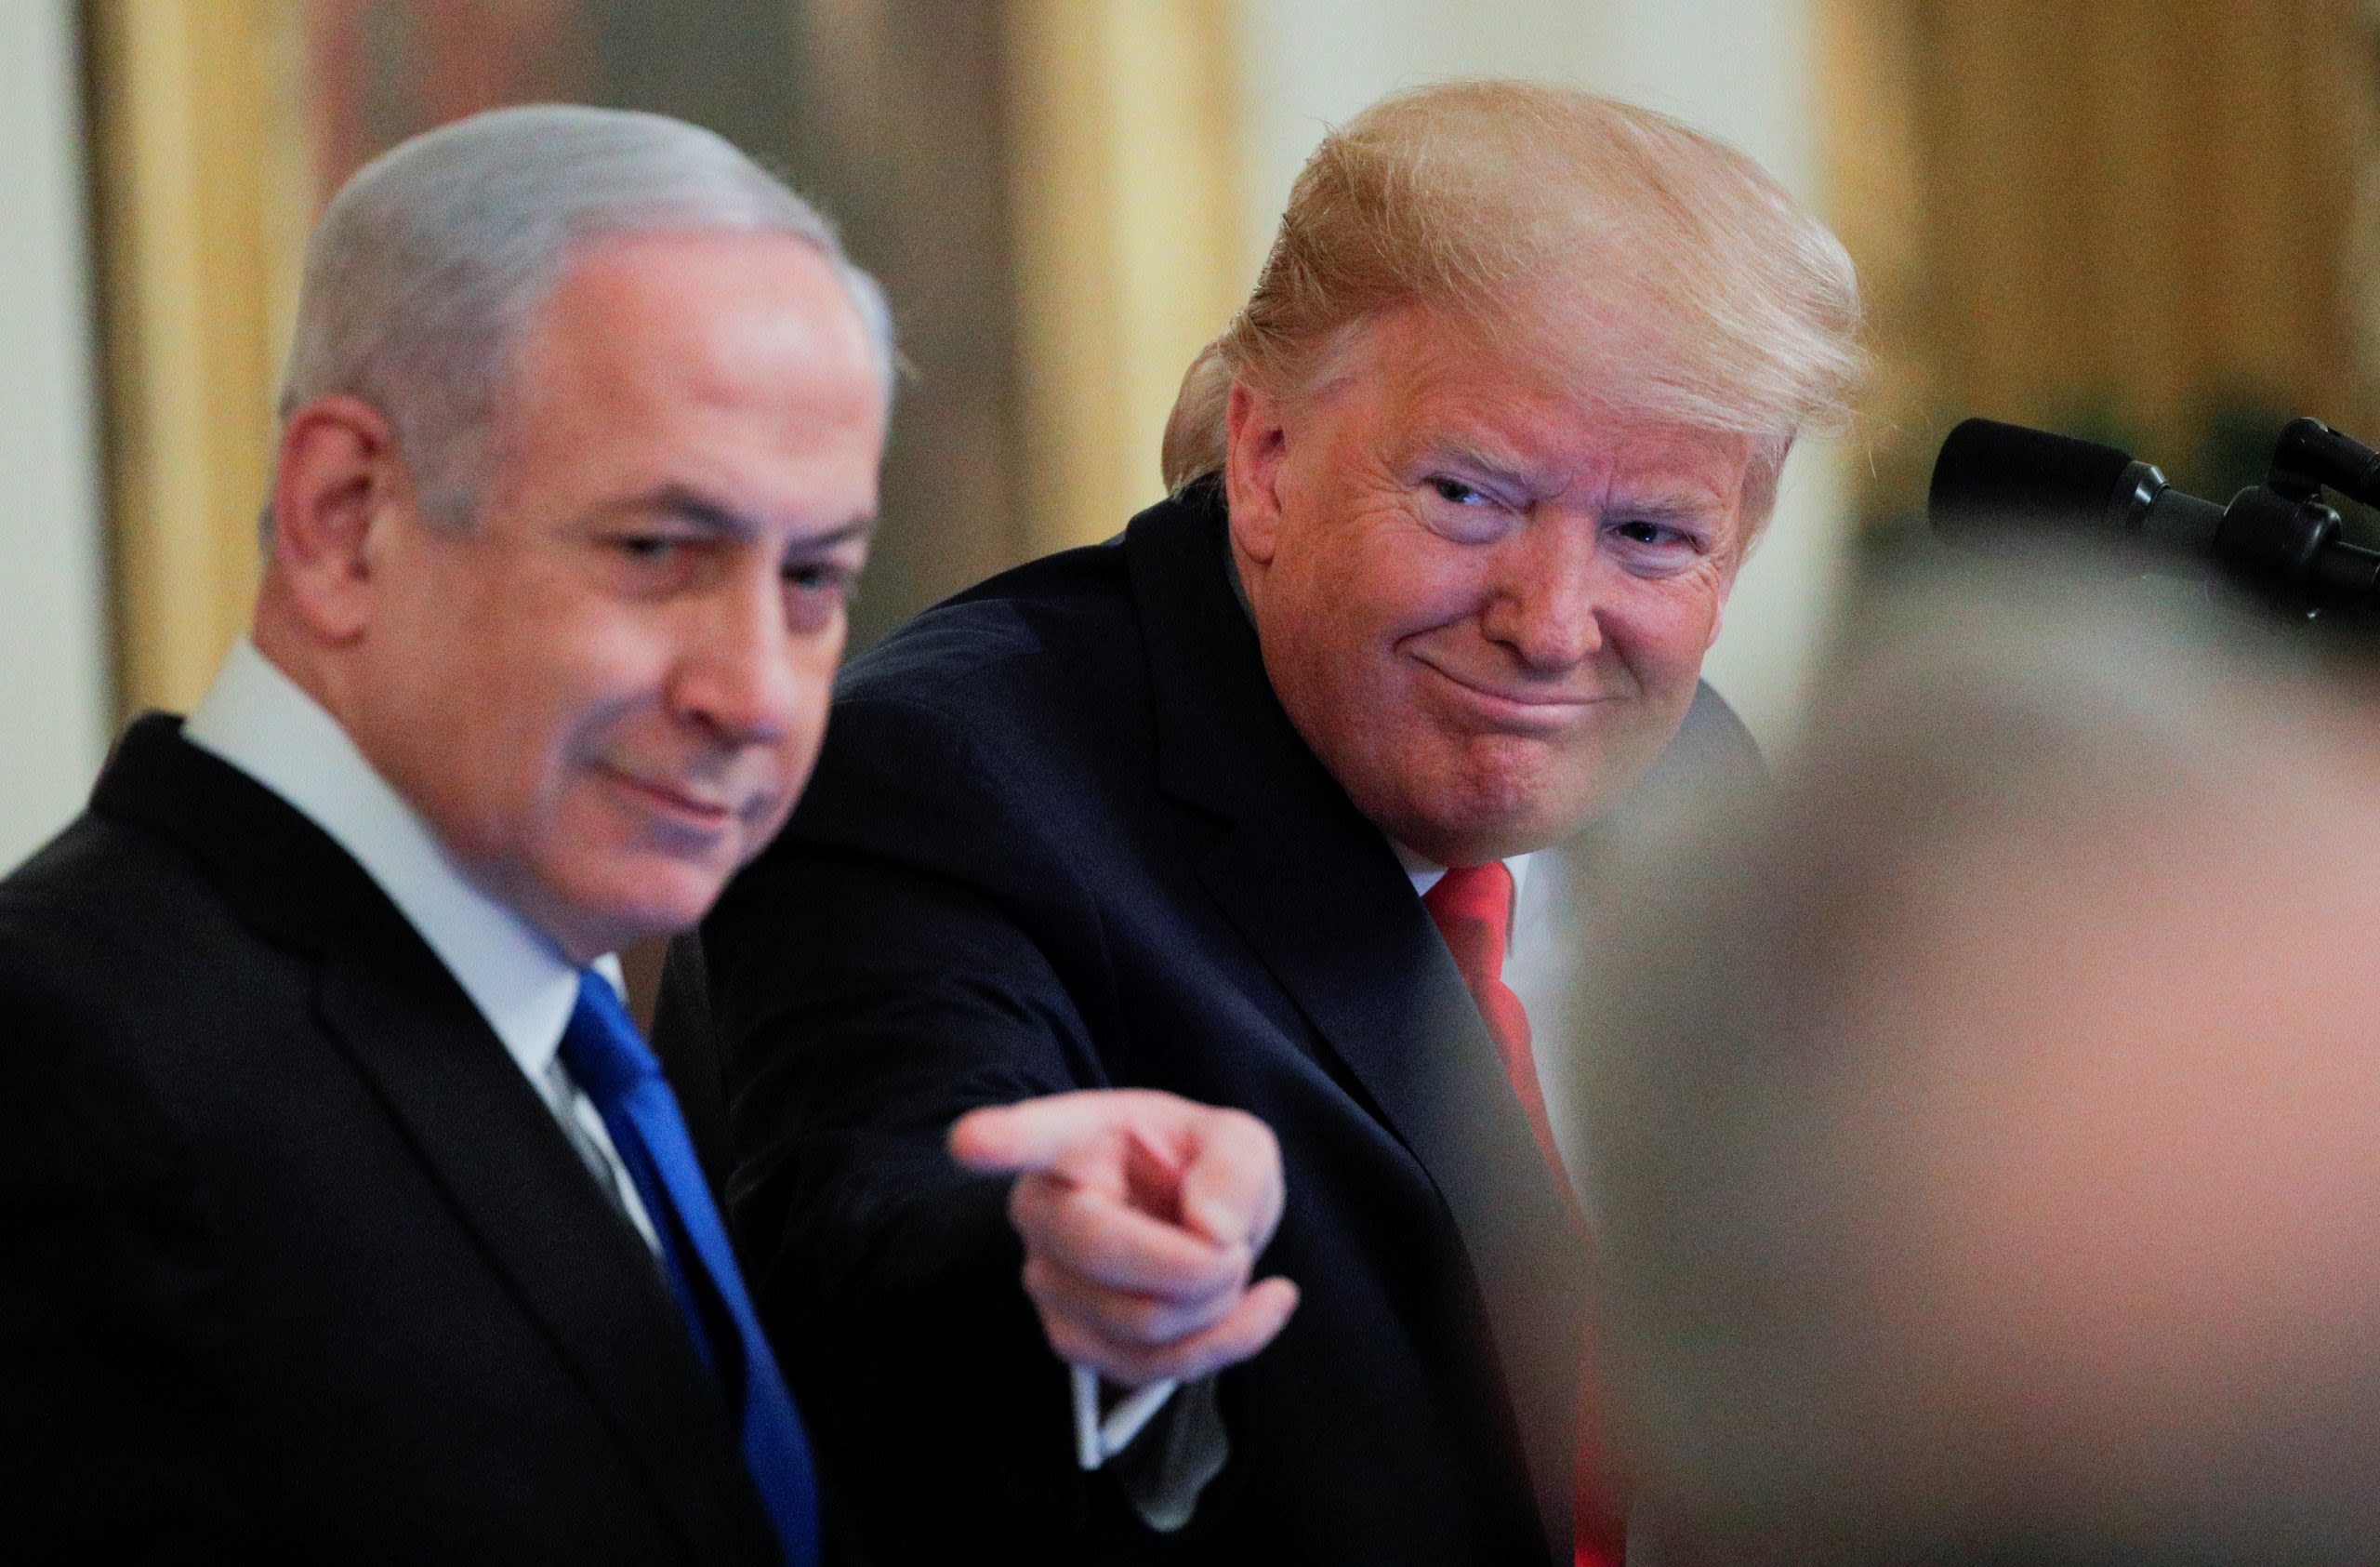 Trump Rips Netanyahu Over Oct. 7th Attack on Israel – ‘Thousands of People Knew about it’